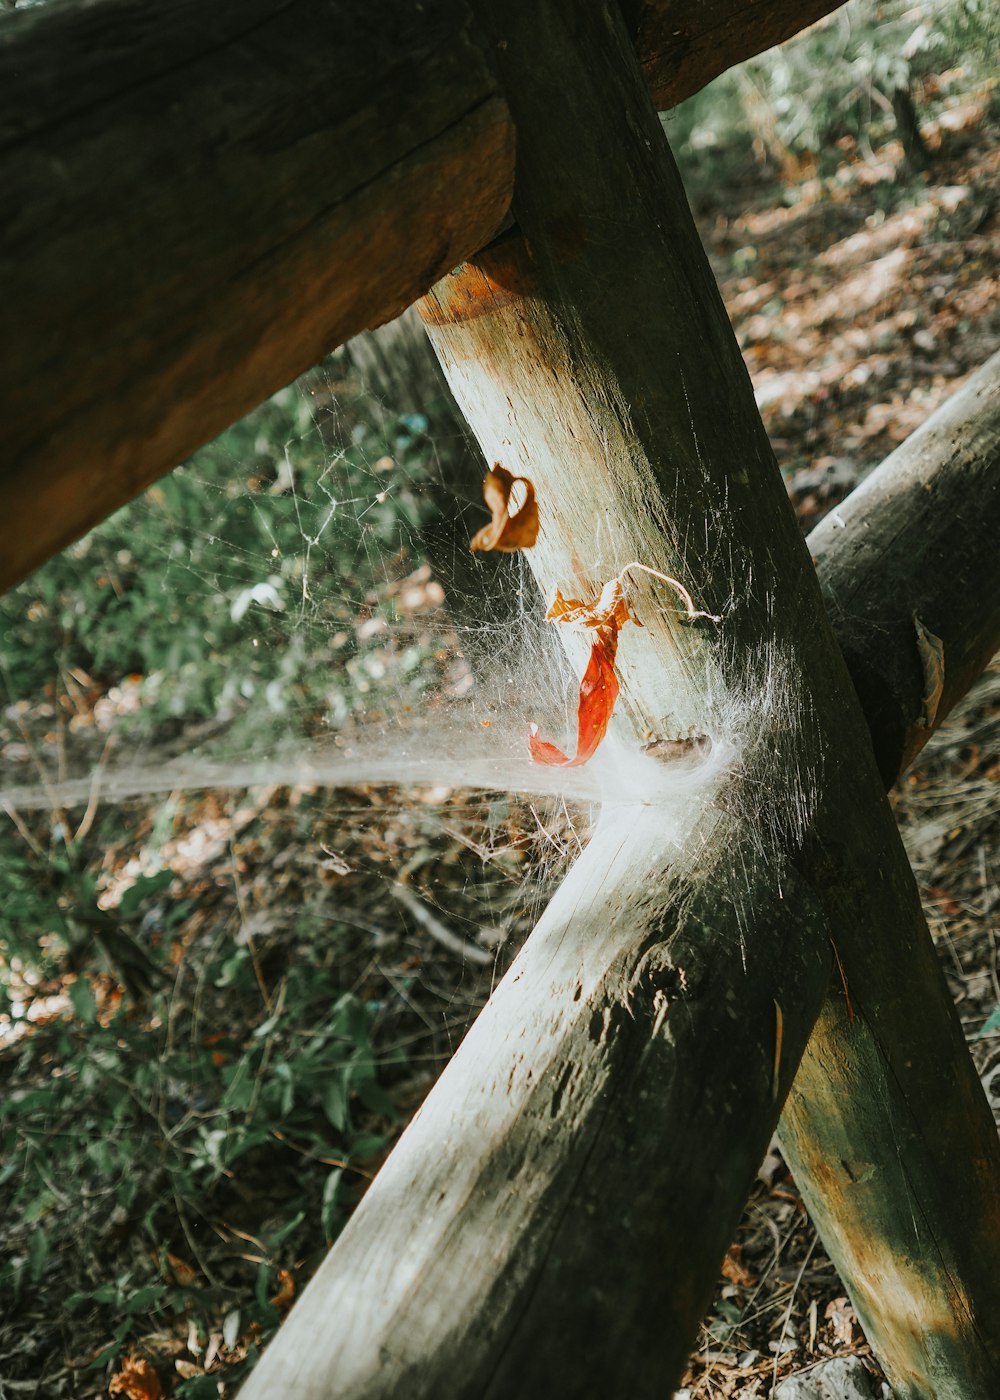 a spider crawling on a wooden post in the woods